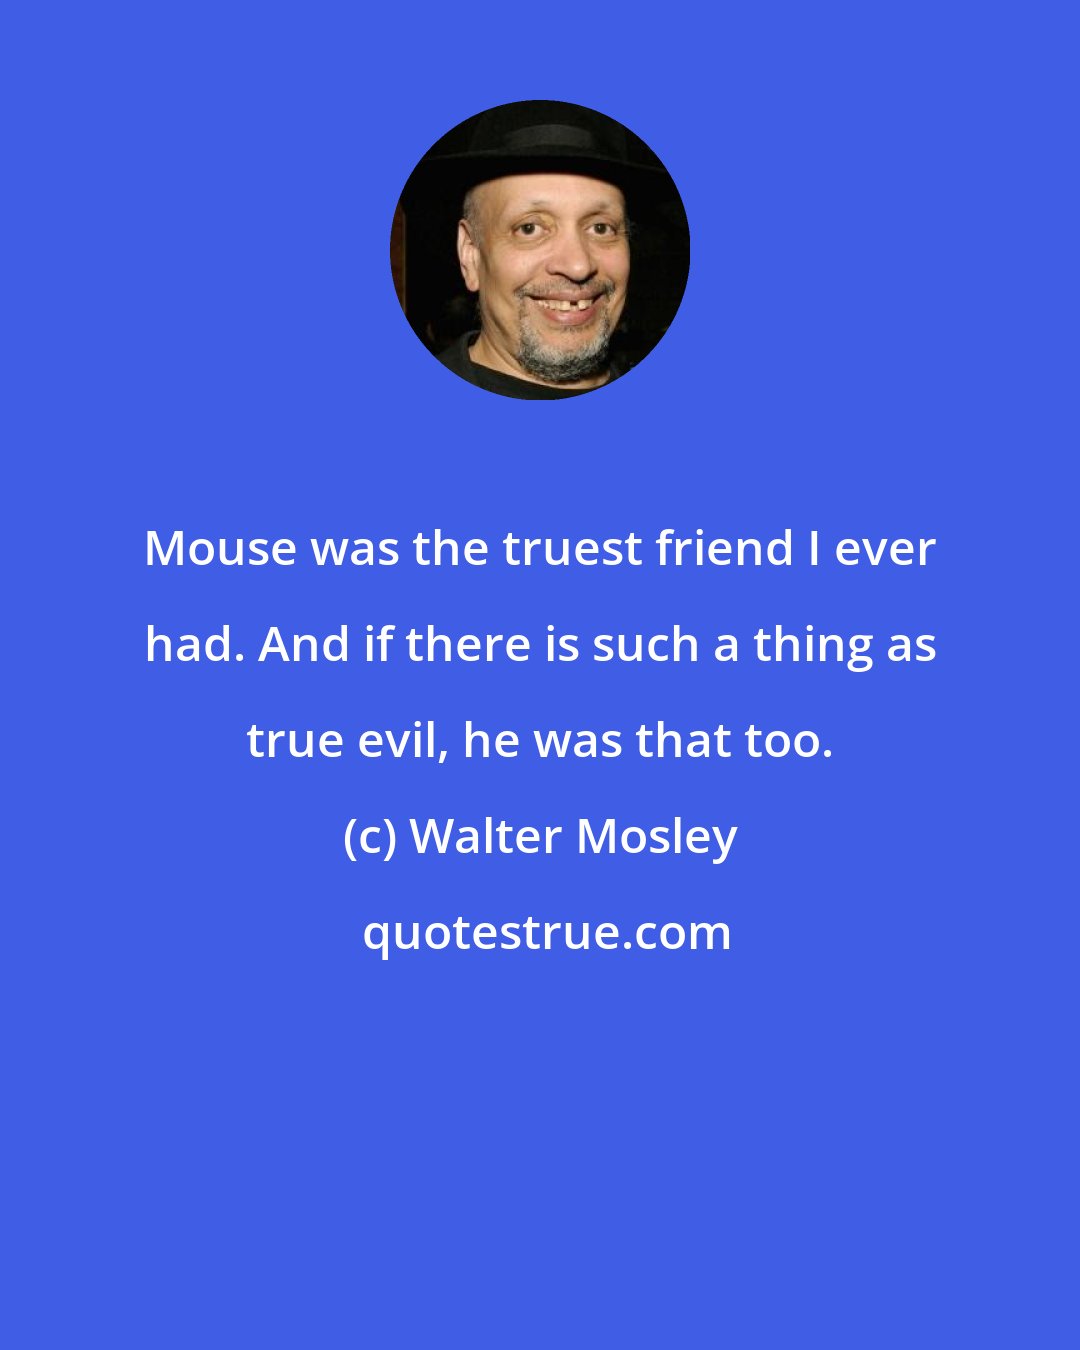 Walter Mosley: Mouse was the truest friend I ever had. And if there is such a thing as true evil, he was that too.